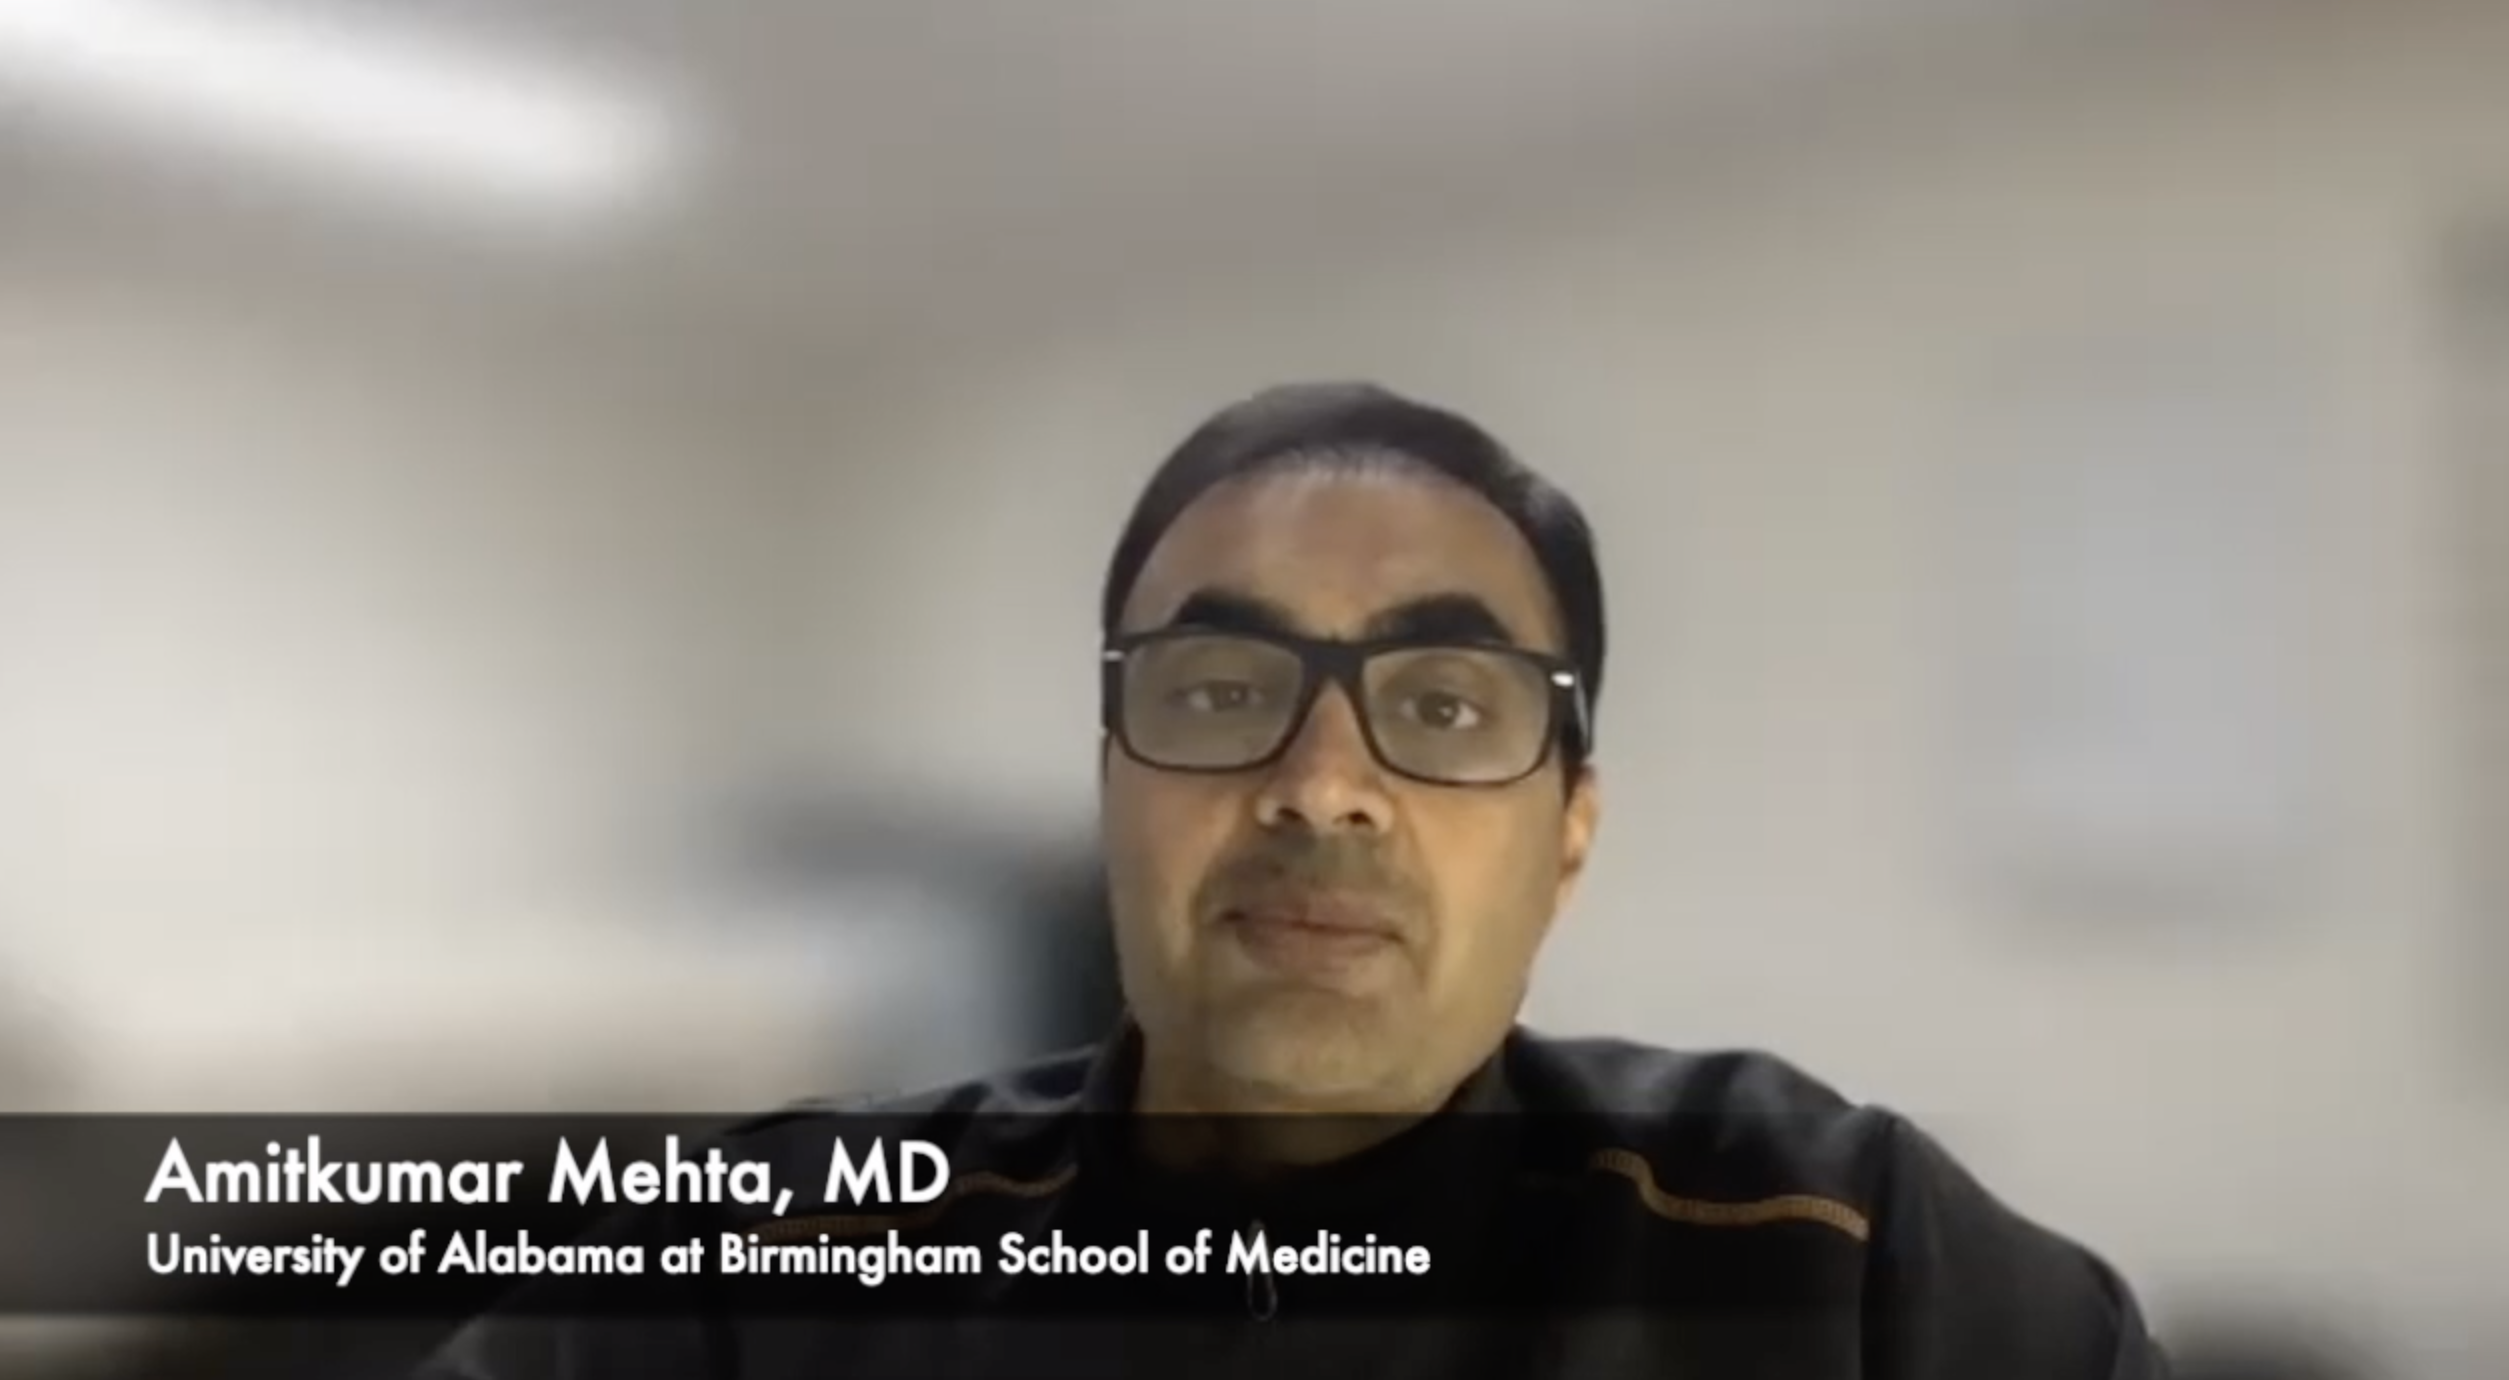 Amitkumar Mehta, MD, discusses the role of parsaclisib and how it fits into the treatment landscape of relapsed/refractory mantle cell lymphoma.